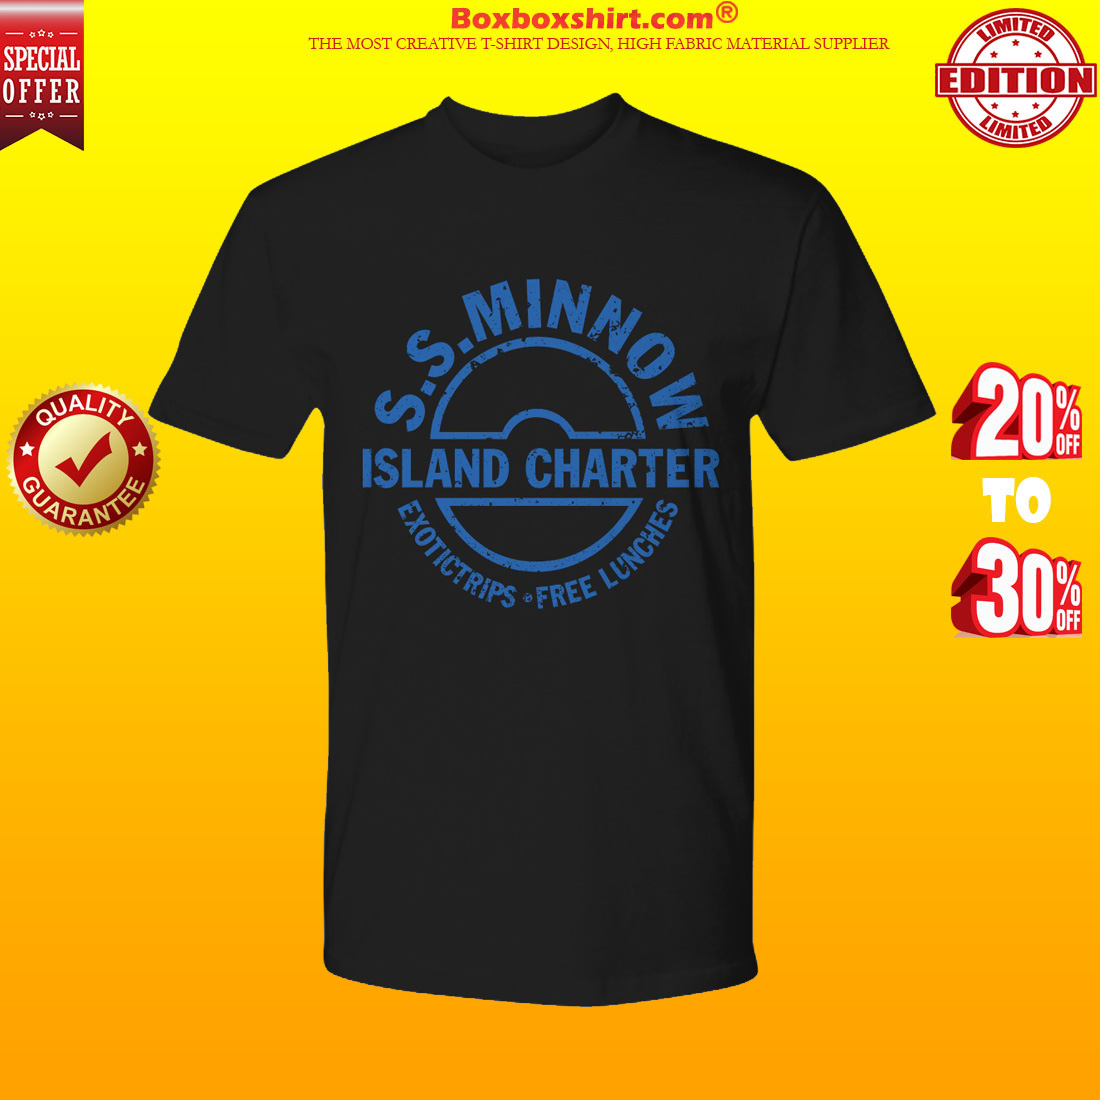 SS minnow island charter exotictrips and free lunches shirt